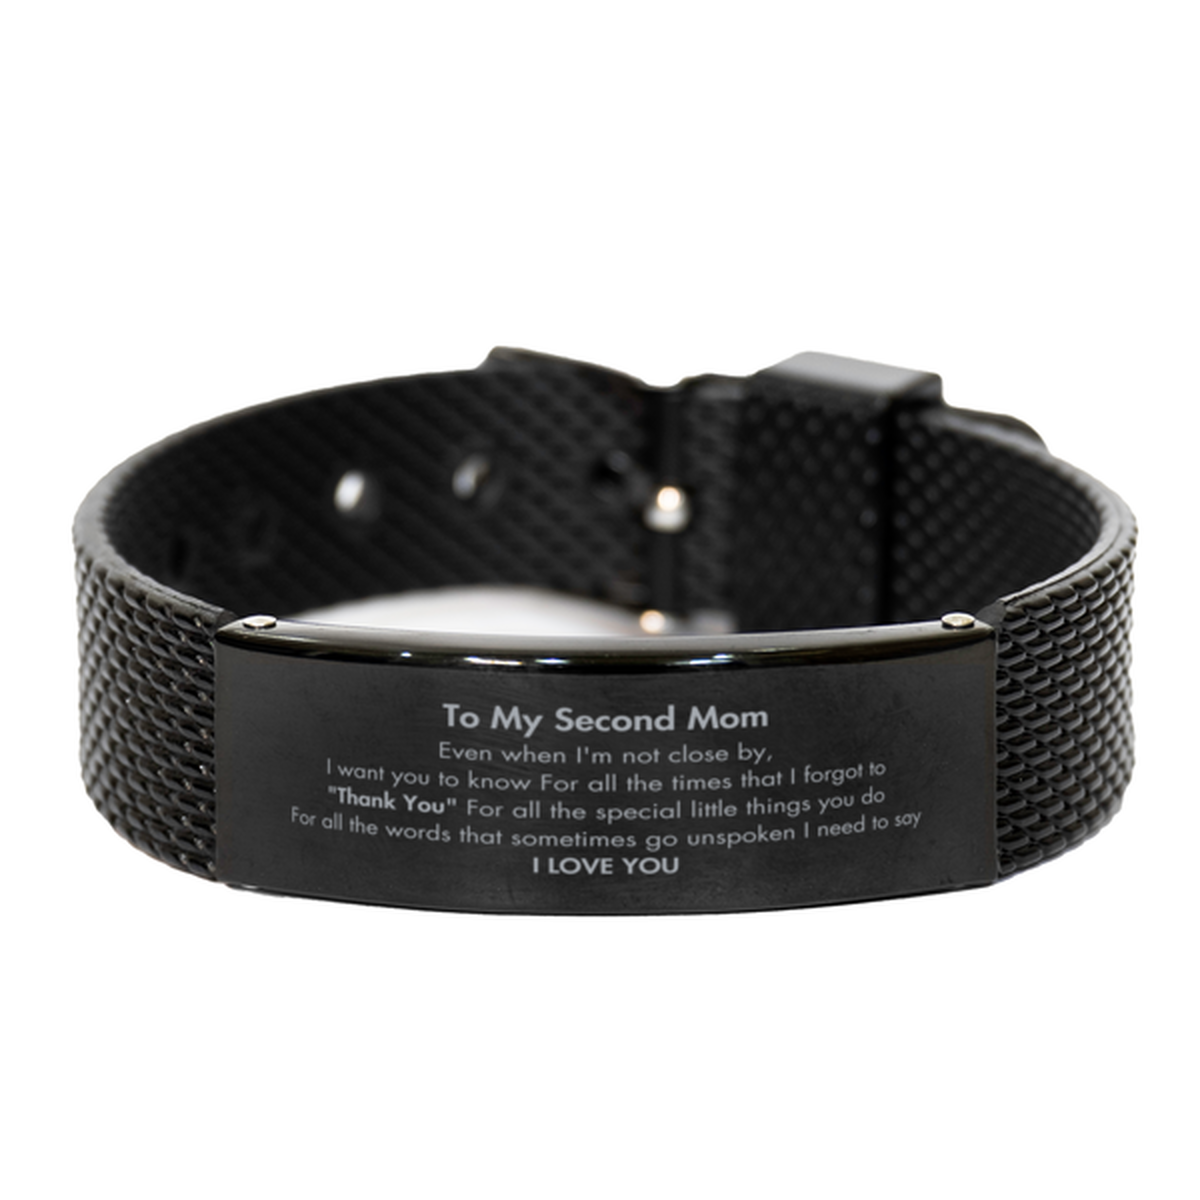 Thank You Gifts for Second Mom, Keepsake Black Shark Mesh Bracelet Gifts for Second Mom Birthday Mother's day Father's Day Second Mom For all the words That sometimes go unspoken I need to say I LOVE YOU